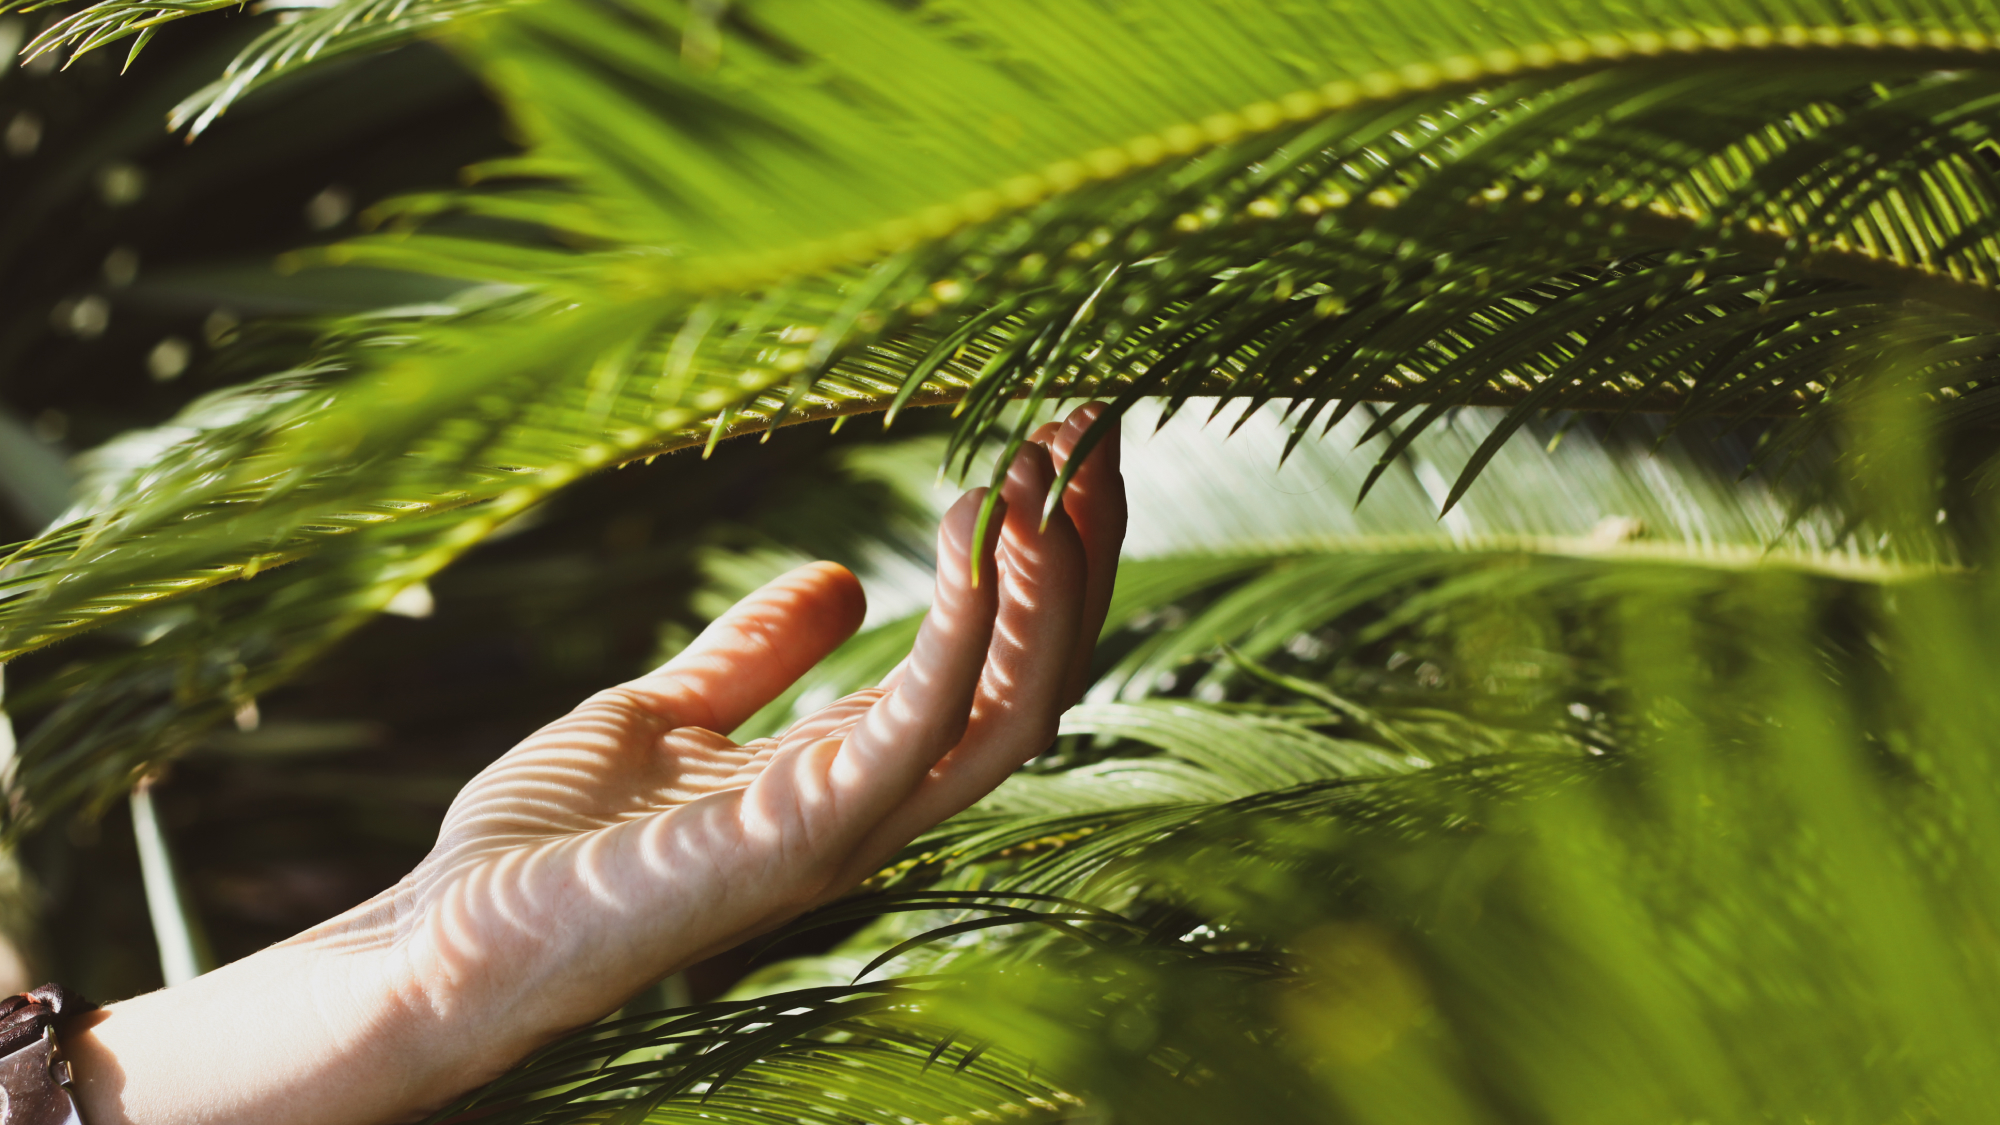 Hand admiring the green palm tree leaves